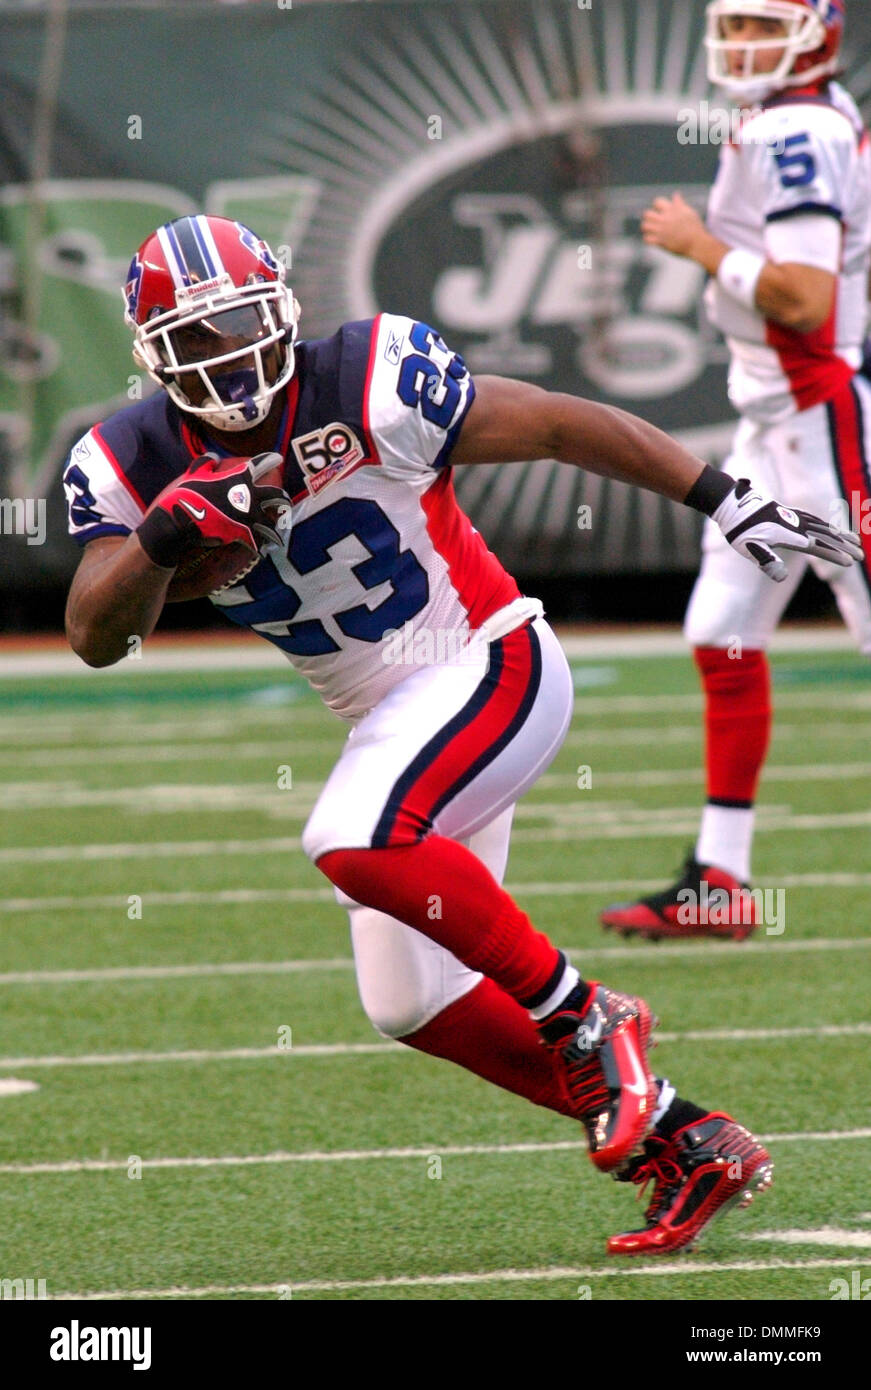 18 October 2009: Buffalo Bills back Marshawn Lynch (23) in action the NFL football game between the Buffalo Bills and New York Jets at Giants Stadium in East Rutheford,